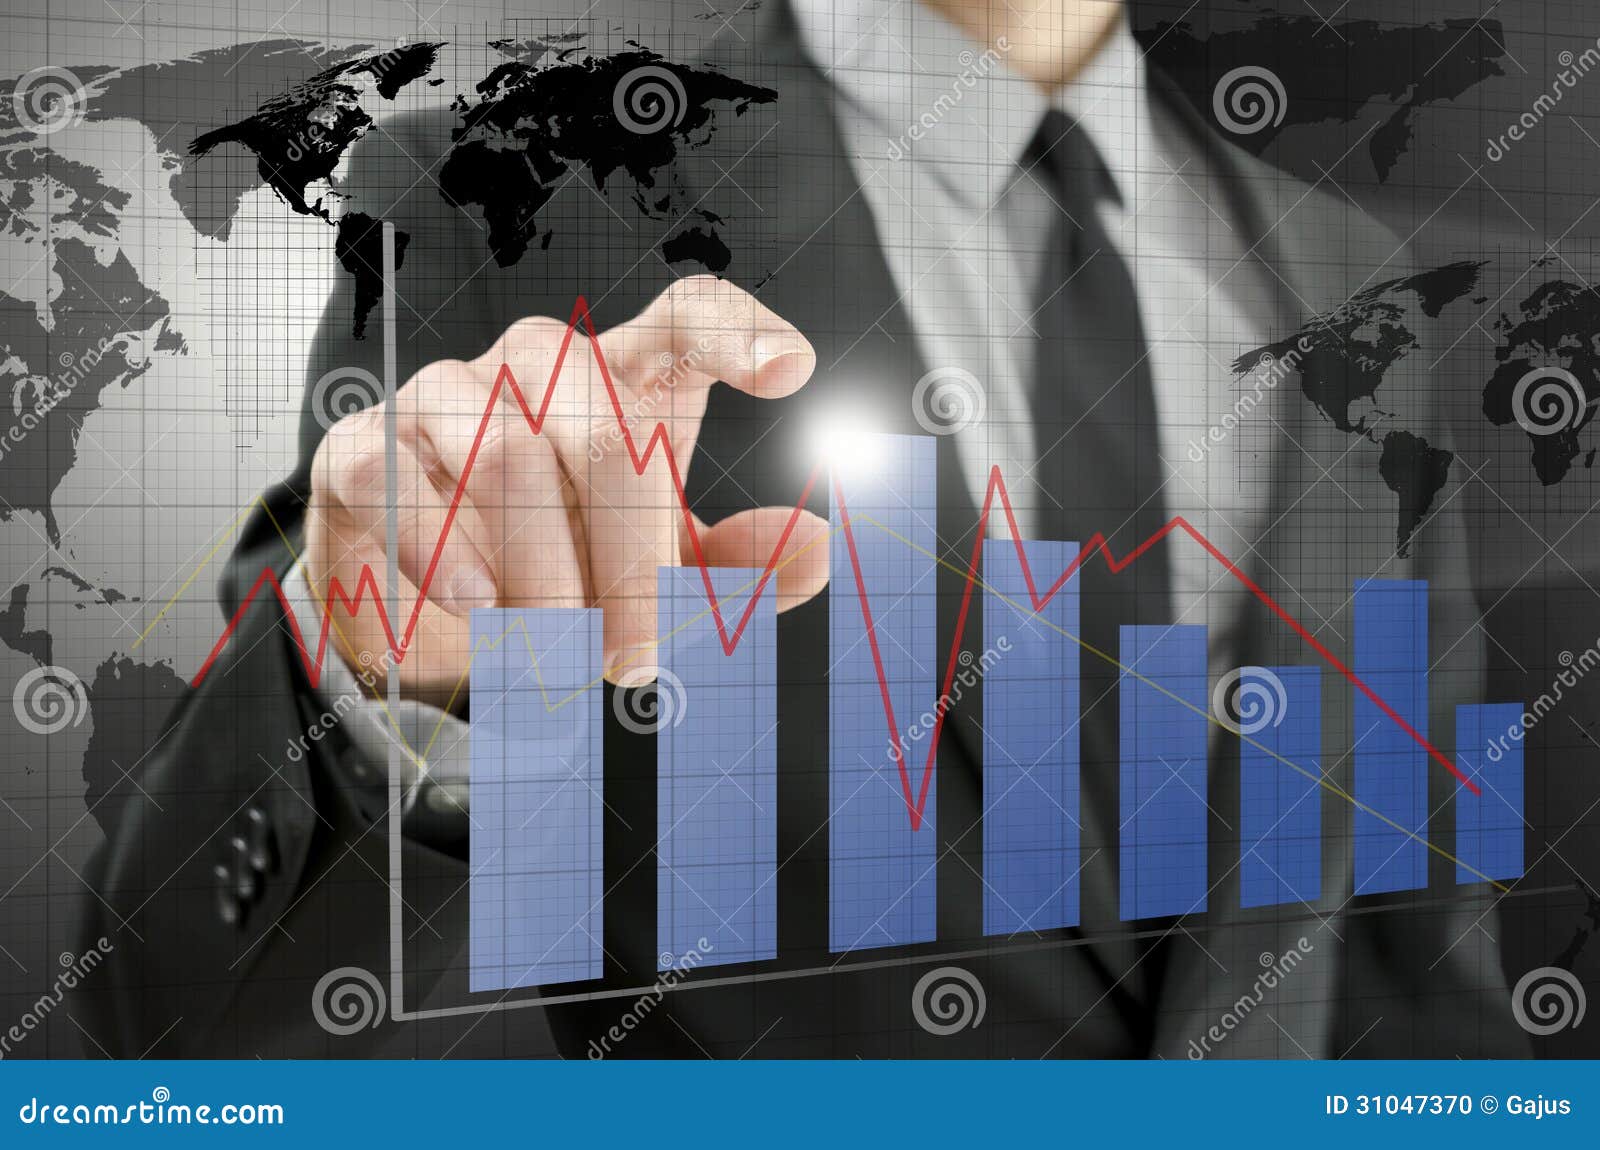 business man pointing at interactive business graph